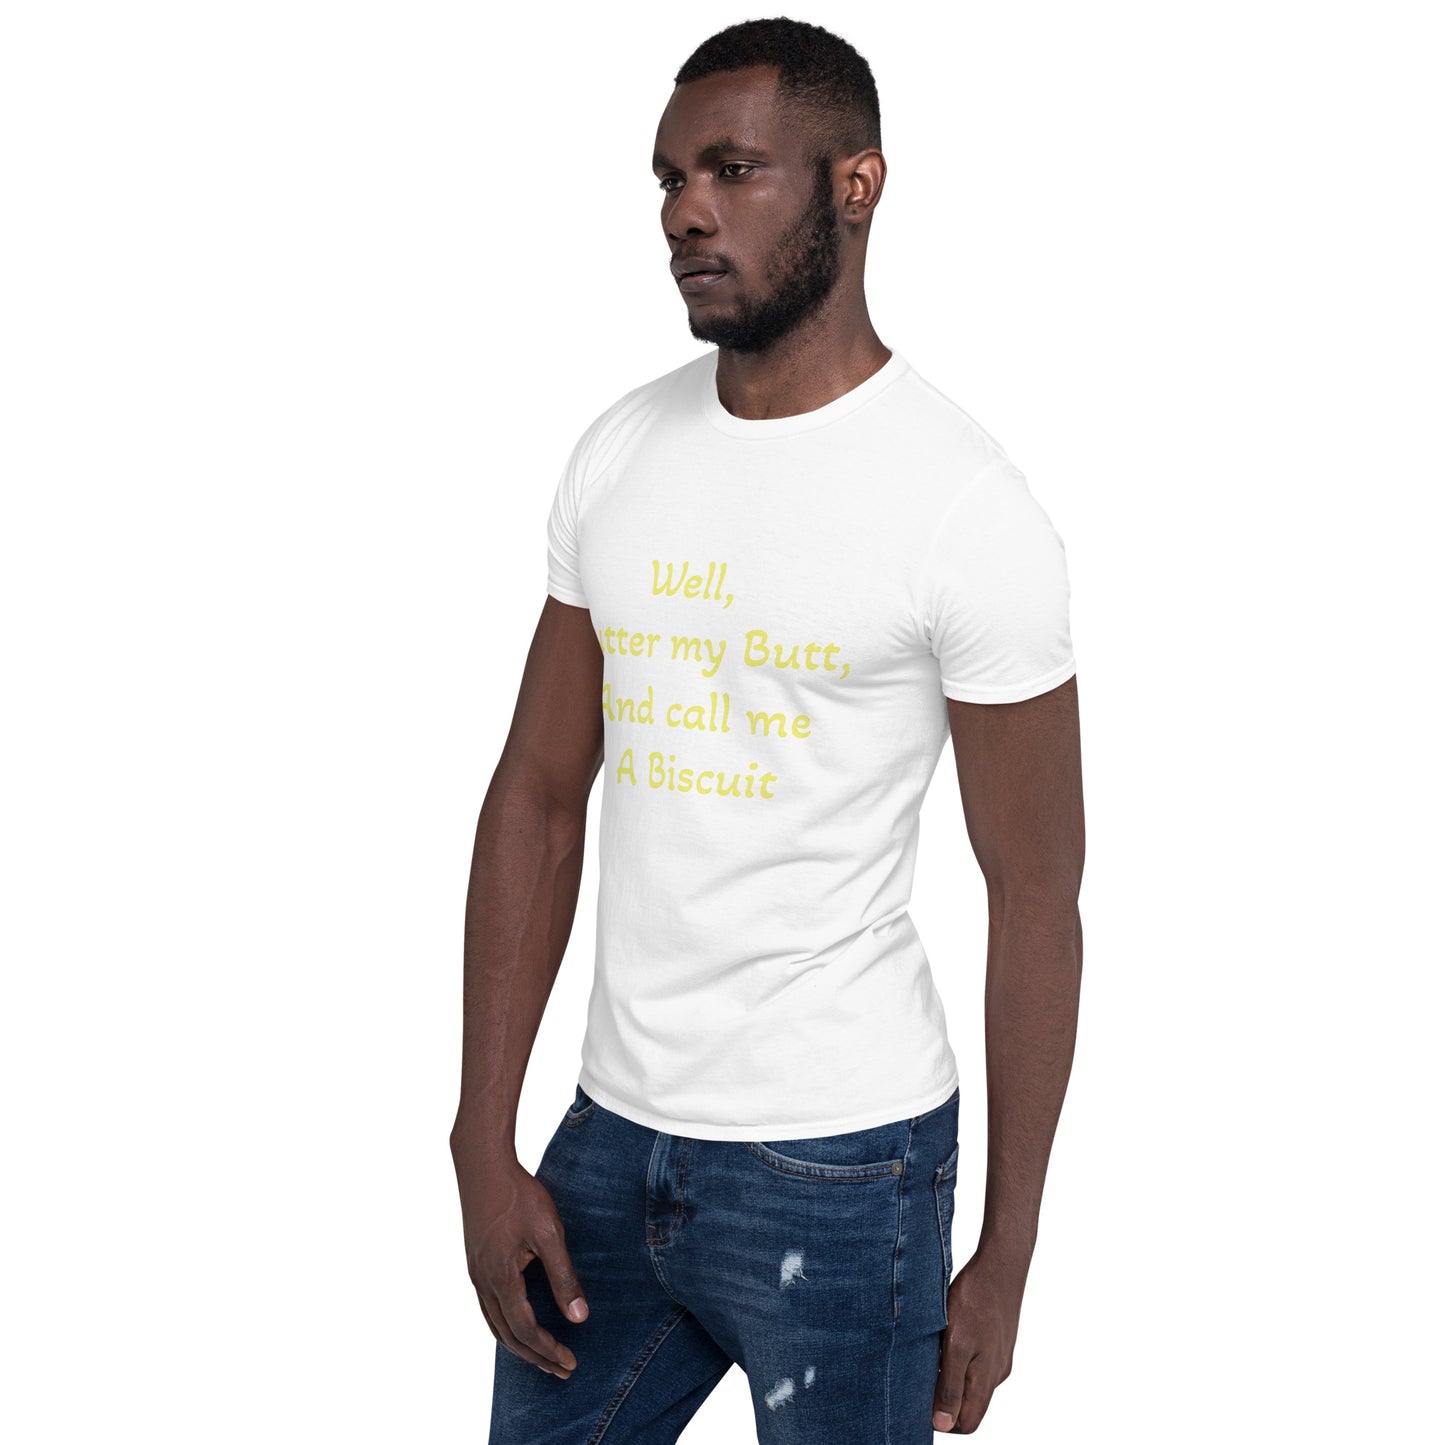 Butter and Biscuit Short-Sleeve Unisex T-Shirt